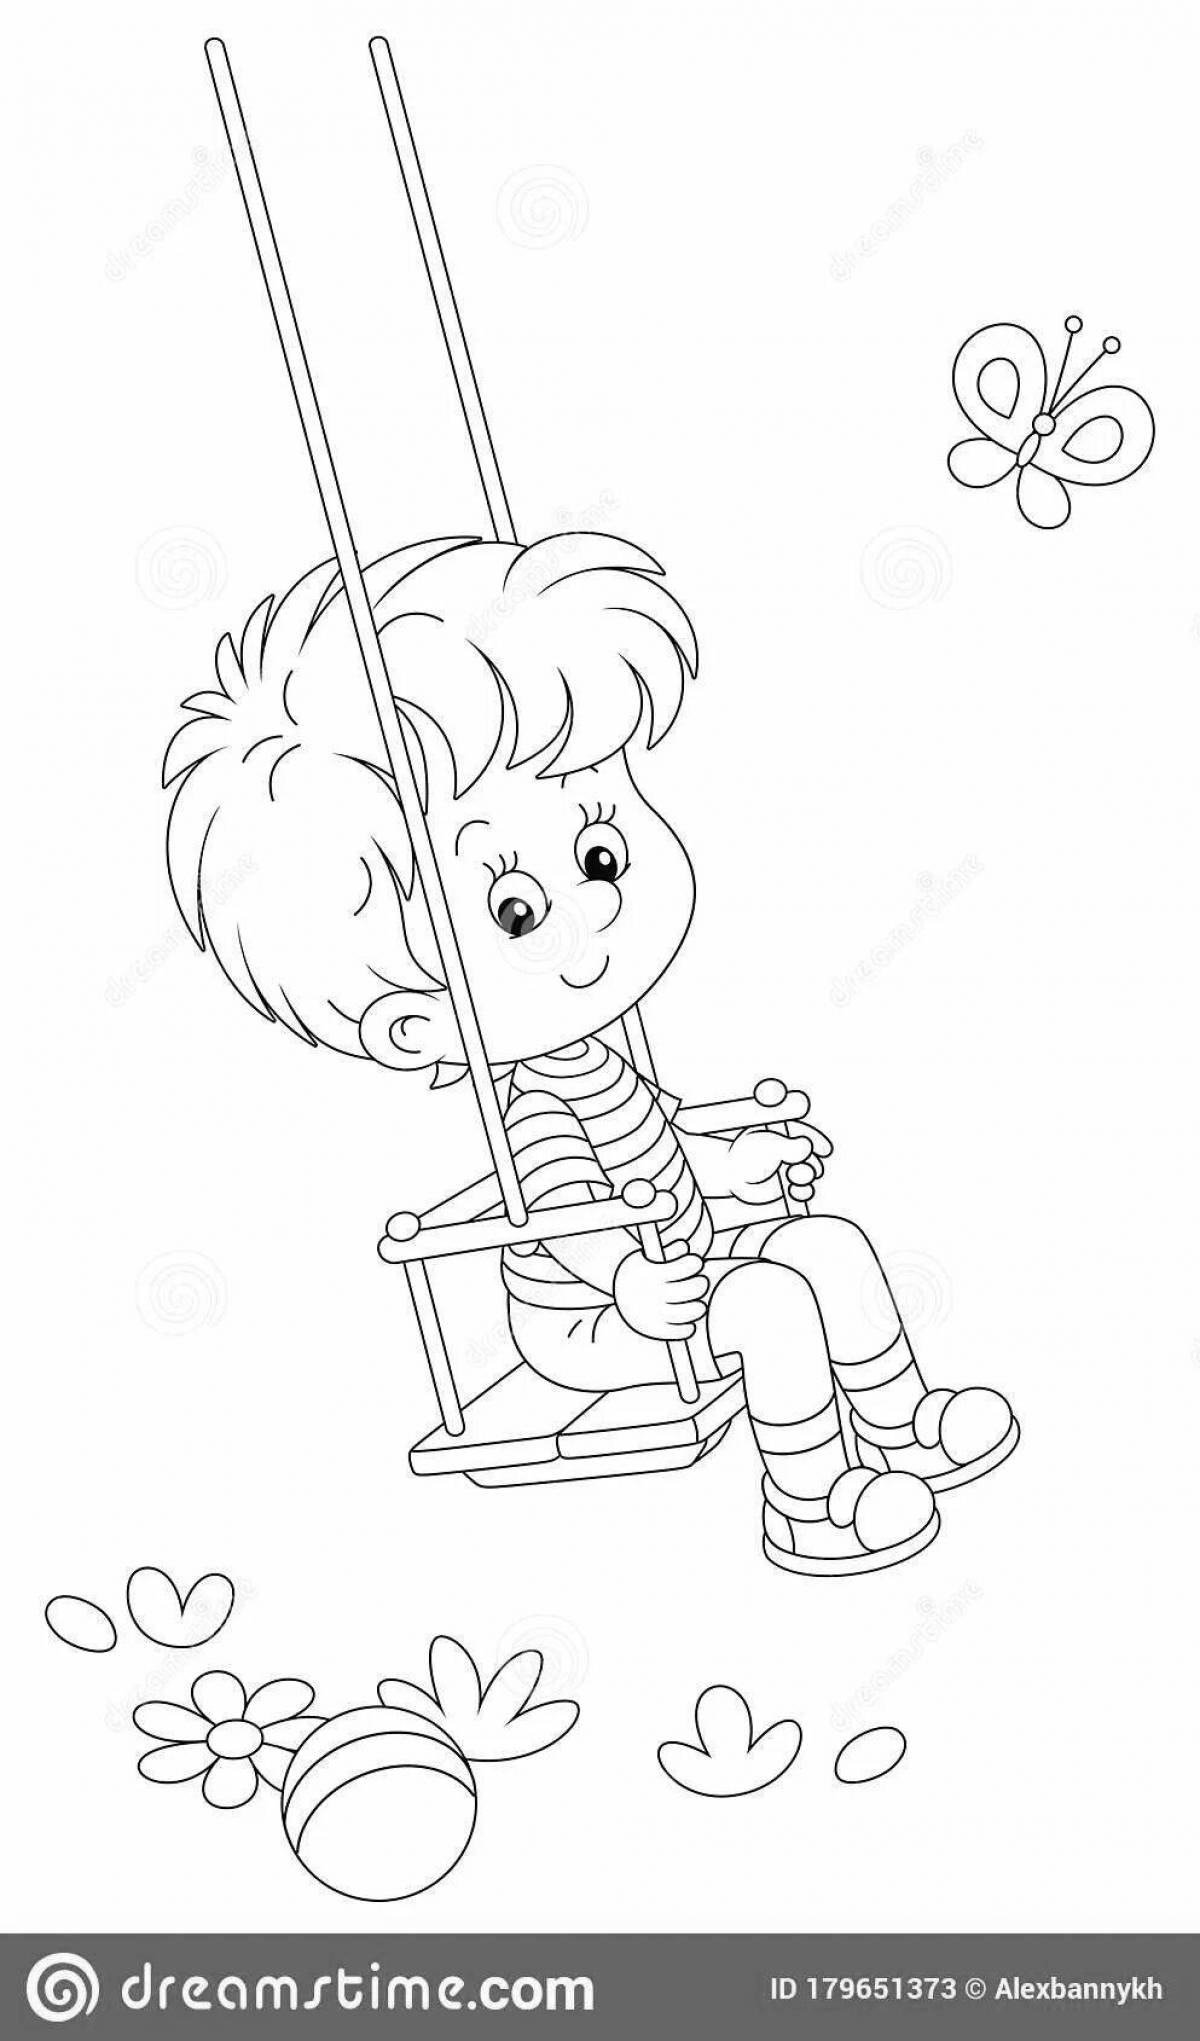 Coloring page playful girl on a swing